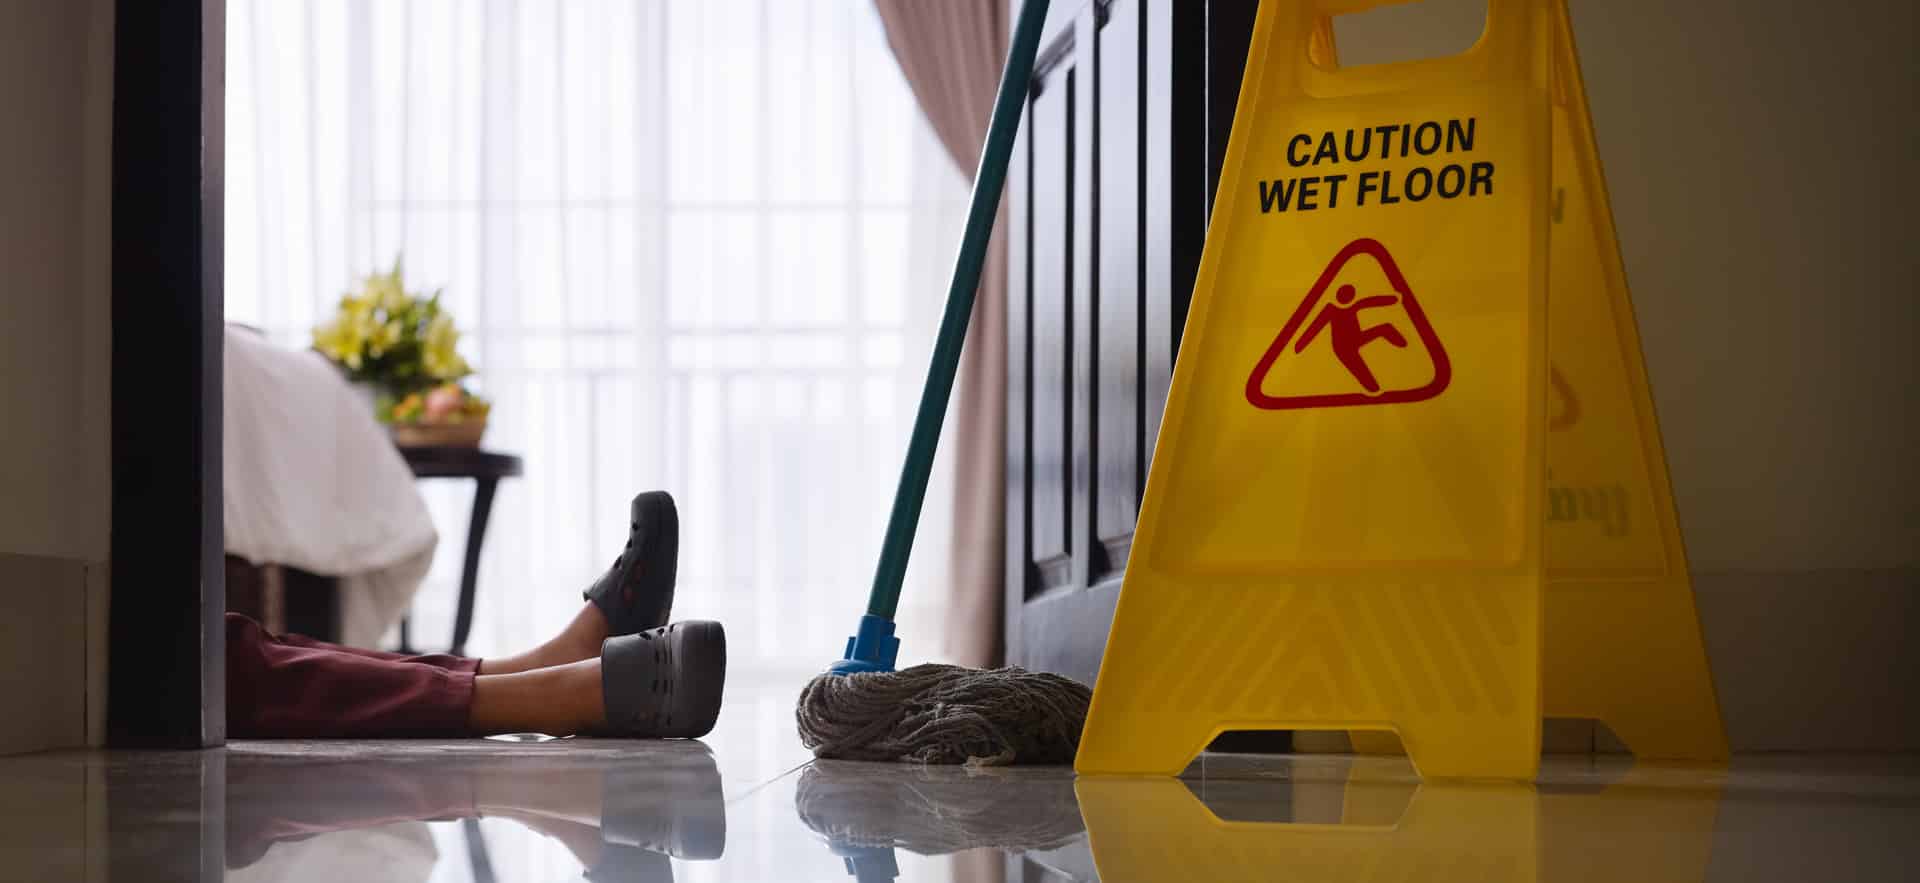 An image of a hotel worker who slipped and fell on slippery floor near a "Caution Wet Floor" sign.